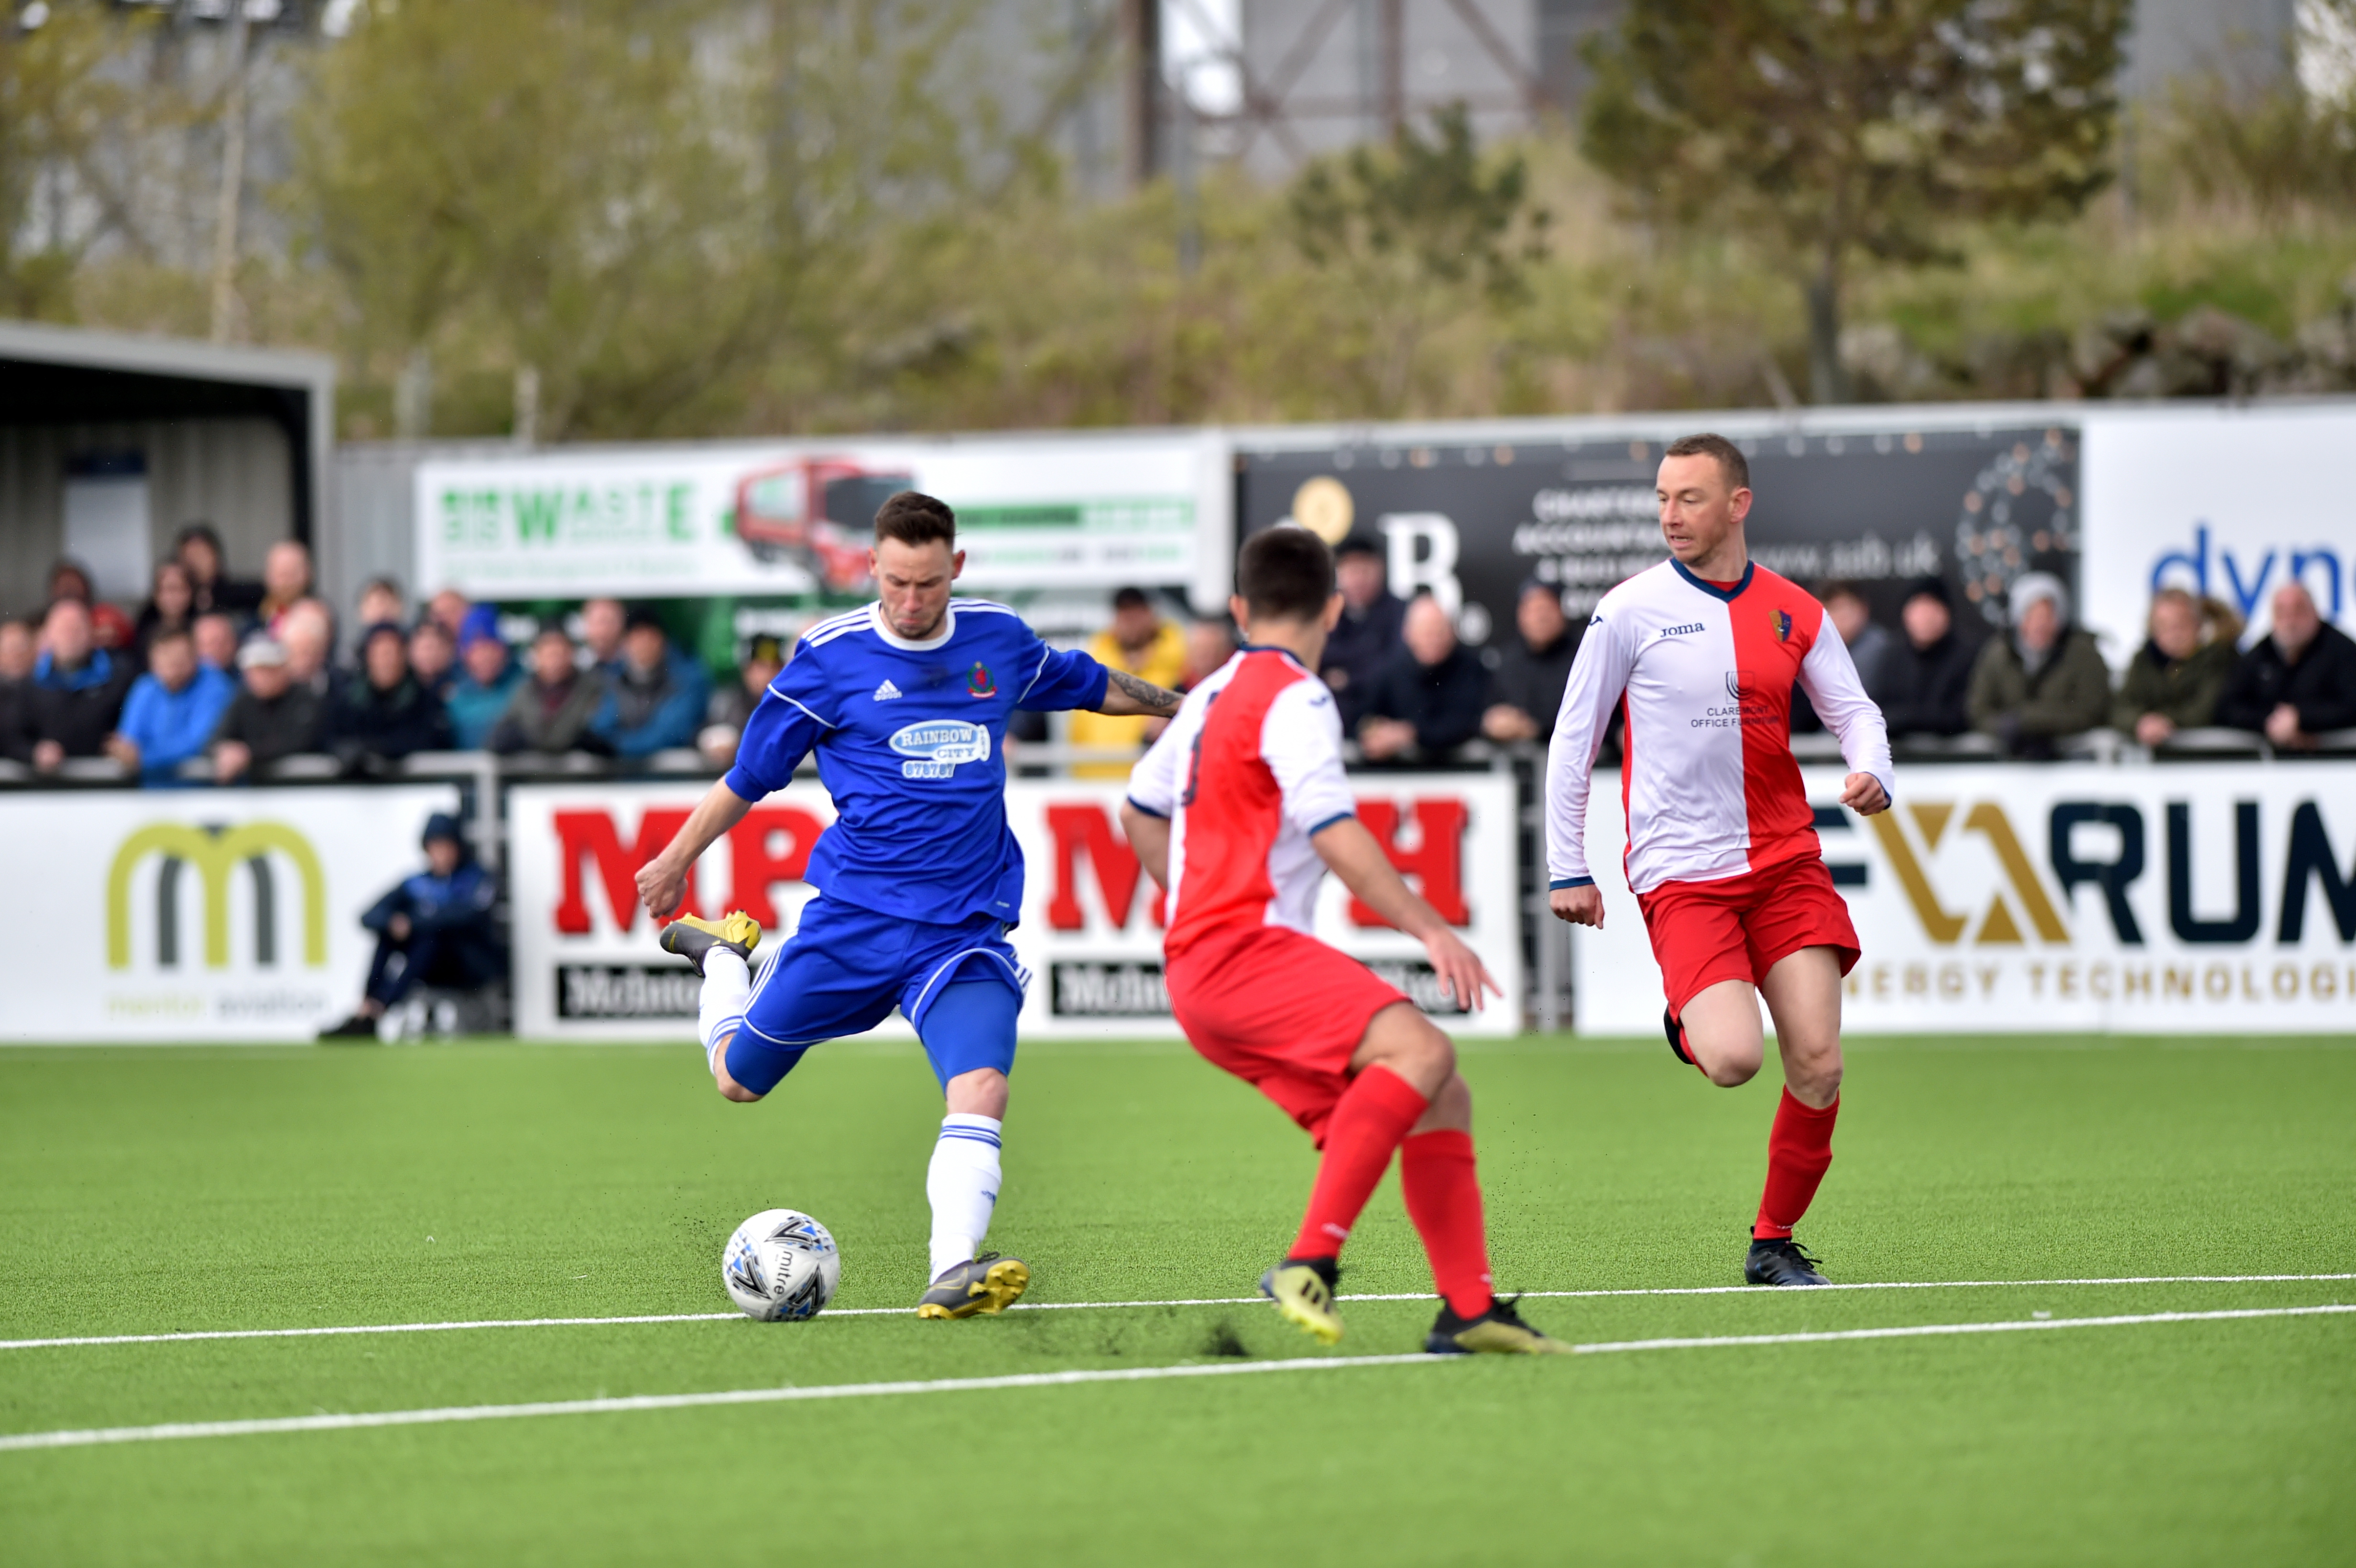 Mitch Megginson was on target in the win over East Kilbride at the weekend.